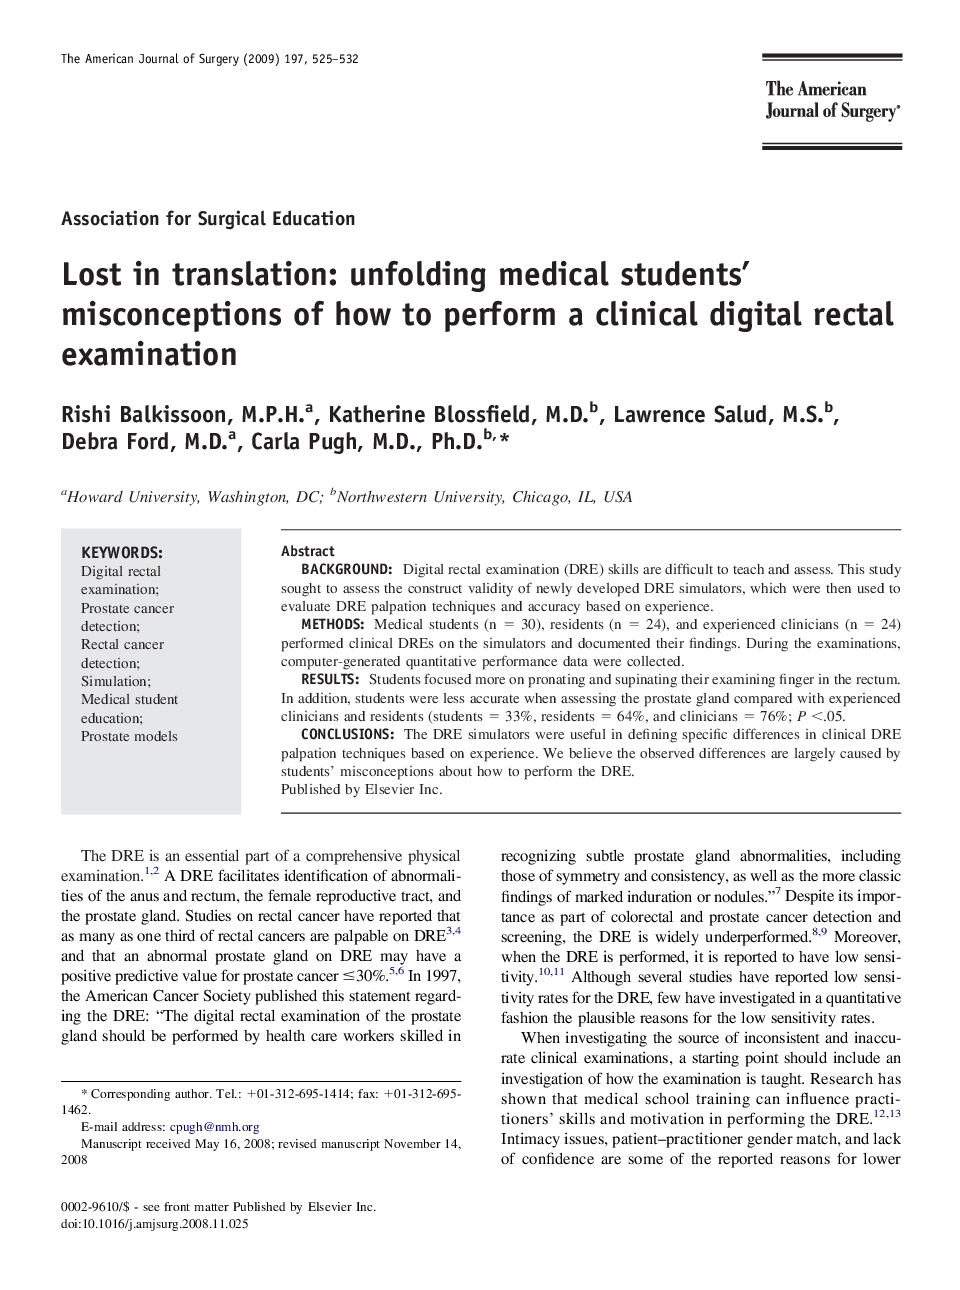 Lost in translation: unfolding medical students' misconceptions of how to perform a clinical digital rectal examination